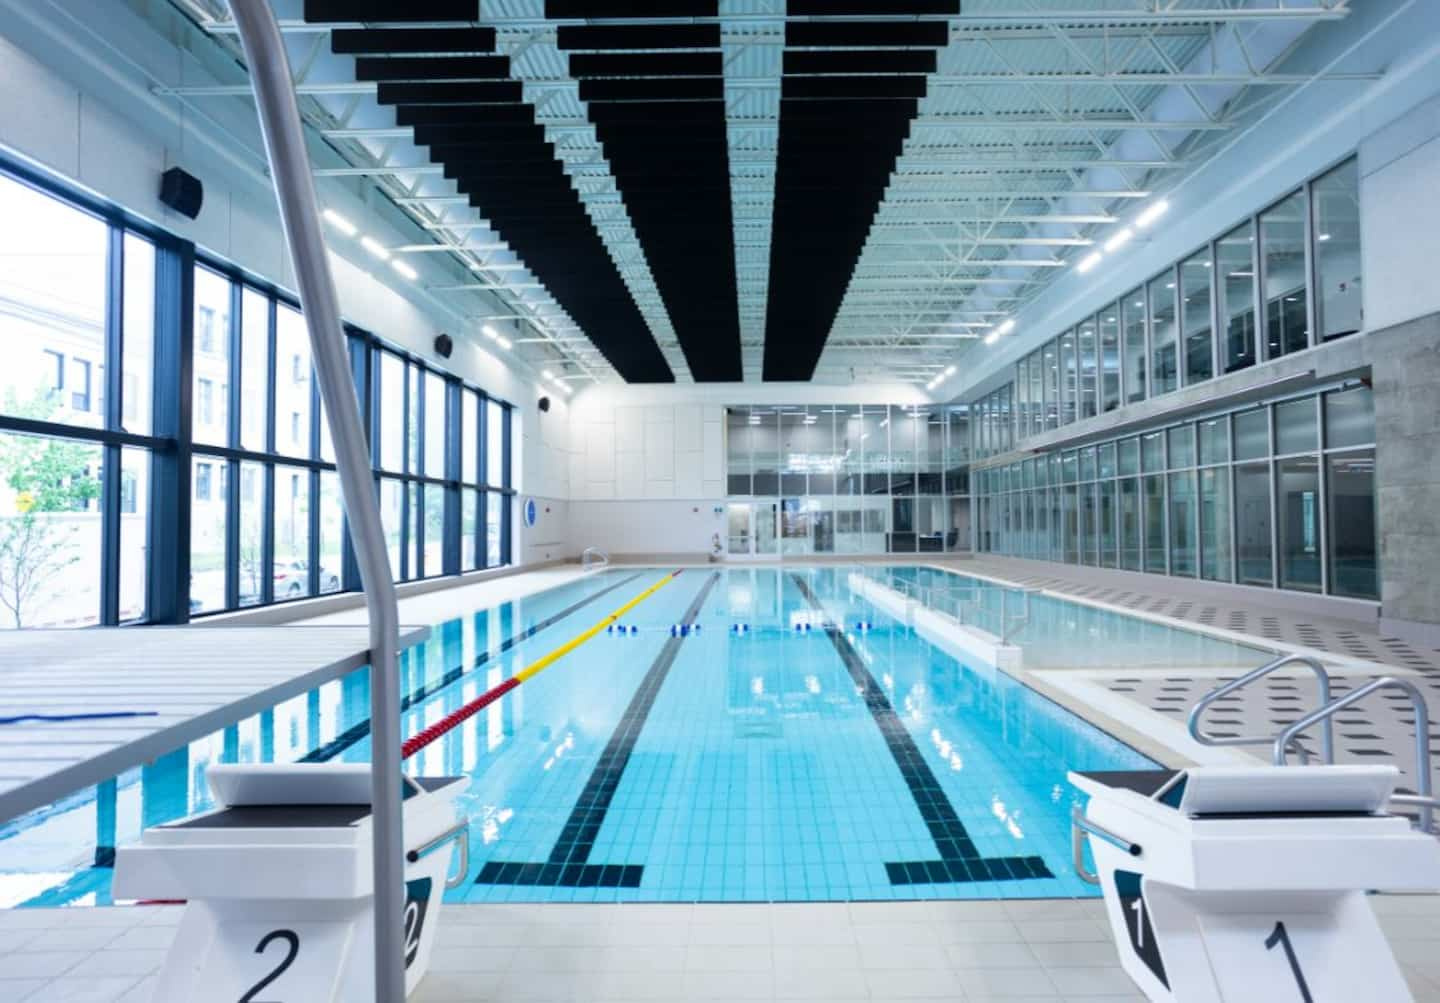 Two weeks after its inauguration, the Rosemont aquatic complex is already closed